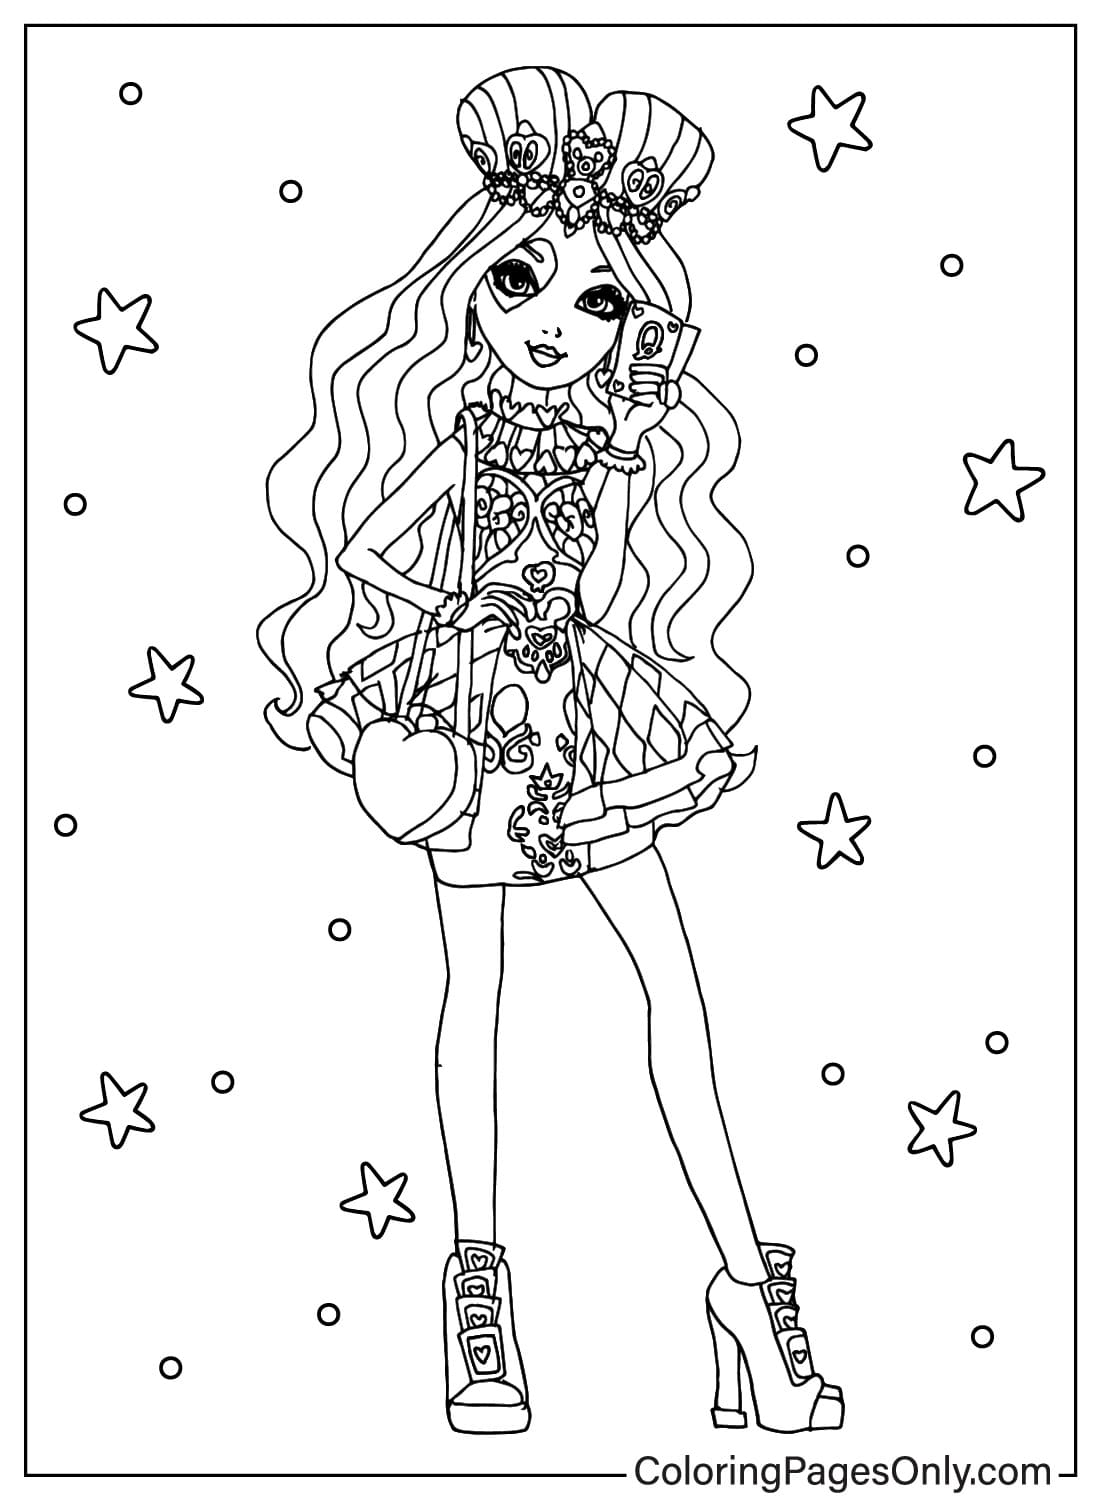 Monster High Coloring Page to Print from Monster High